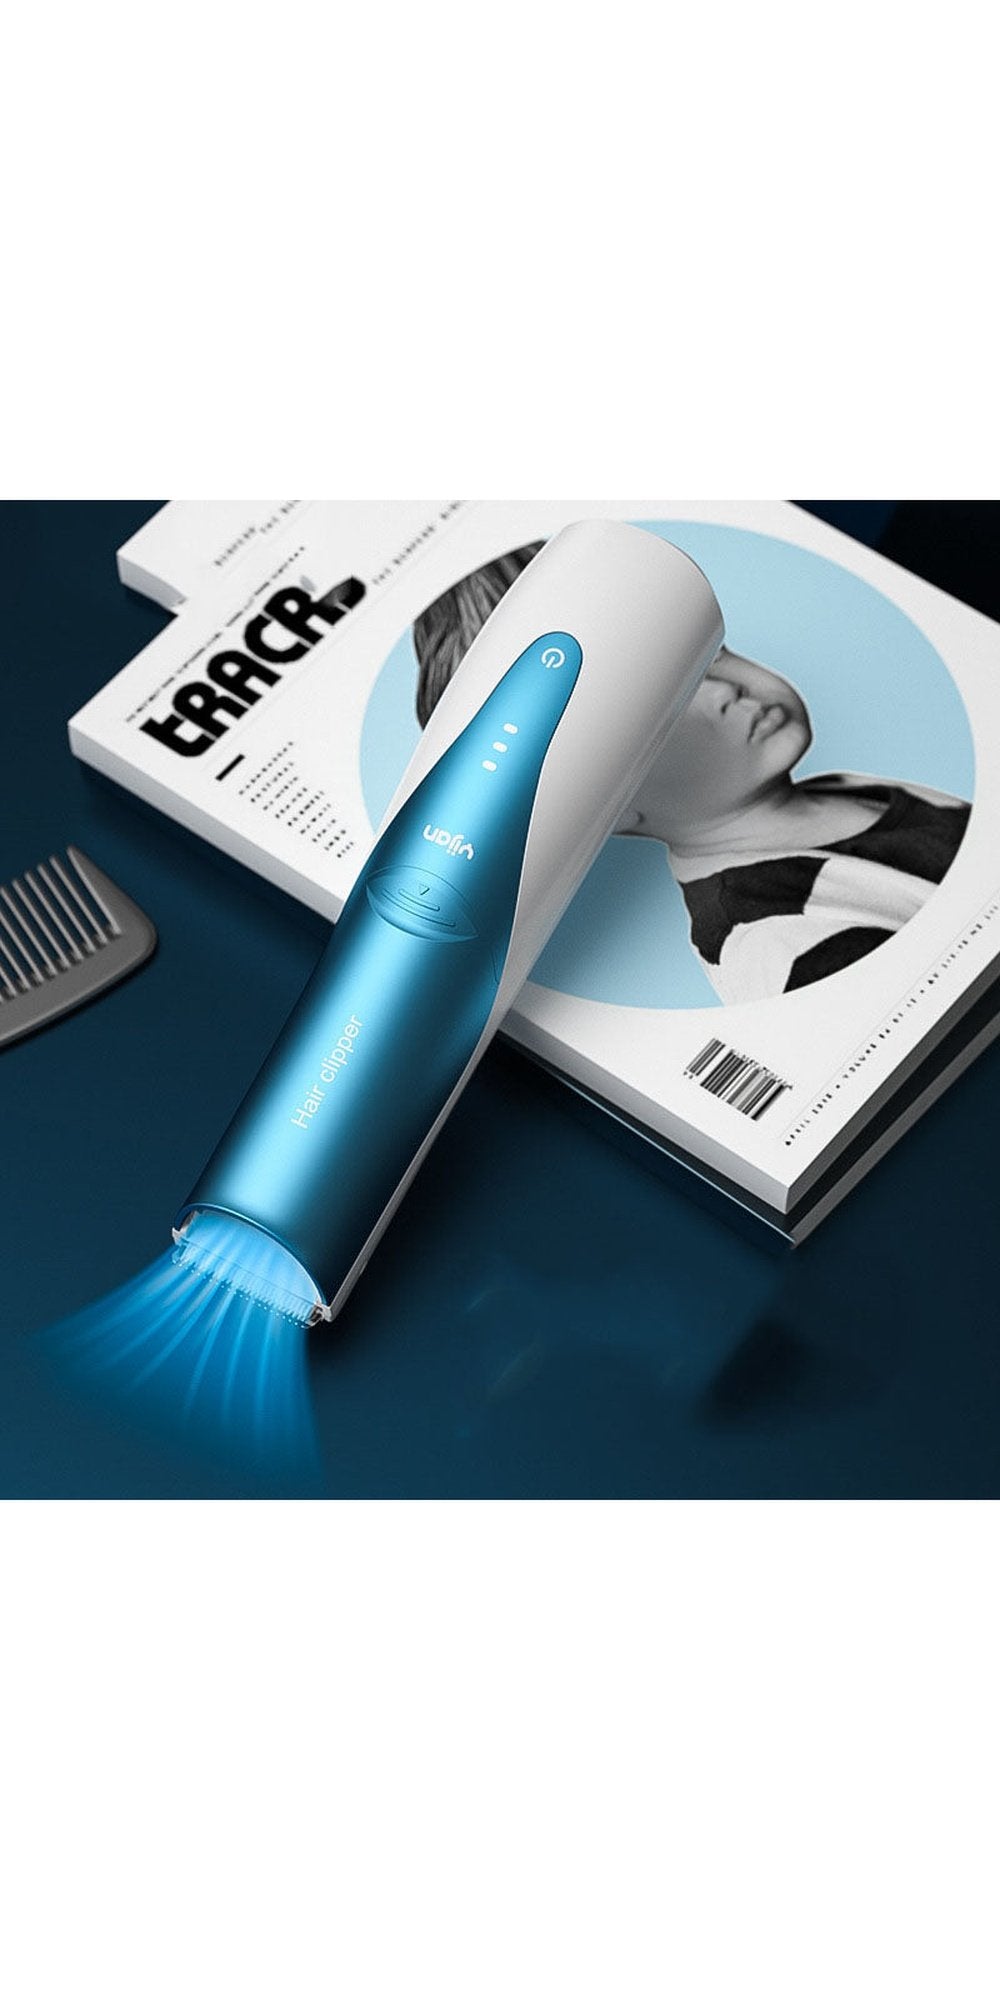 This image showcases a gentle and safe hair clipping tool designed for children. The blue LED light indicates precision while providing a comforting guide for parents during the haircut.